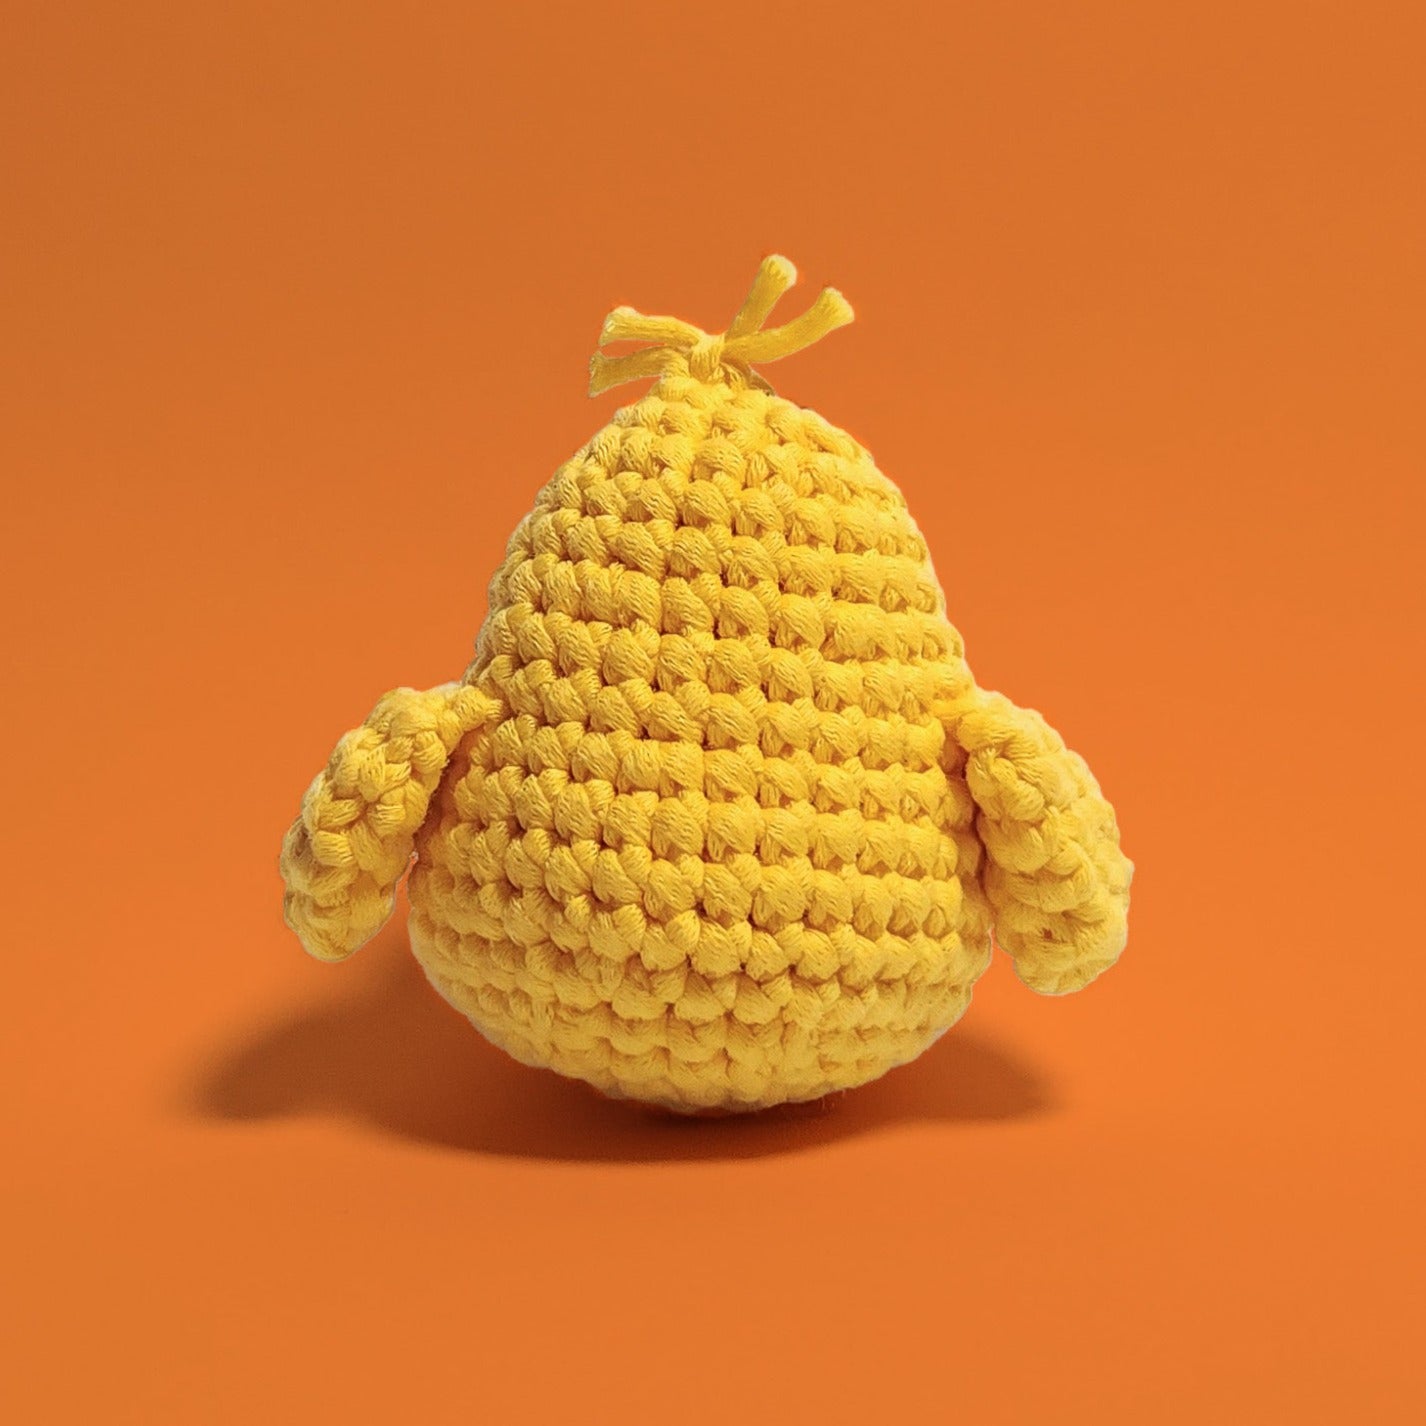 Yellow baby chick crochet amigurumi with adorable hair accents. Handcrafted with love using our beginner-friendly crochet kit, this charming chick is a delightful project for crafters of all levels. Back view.